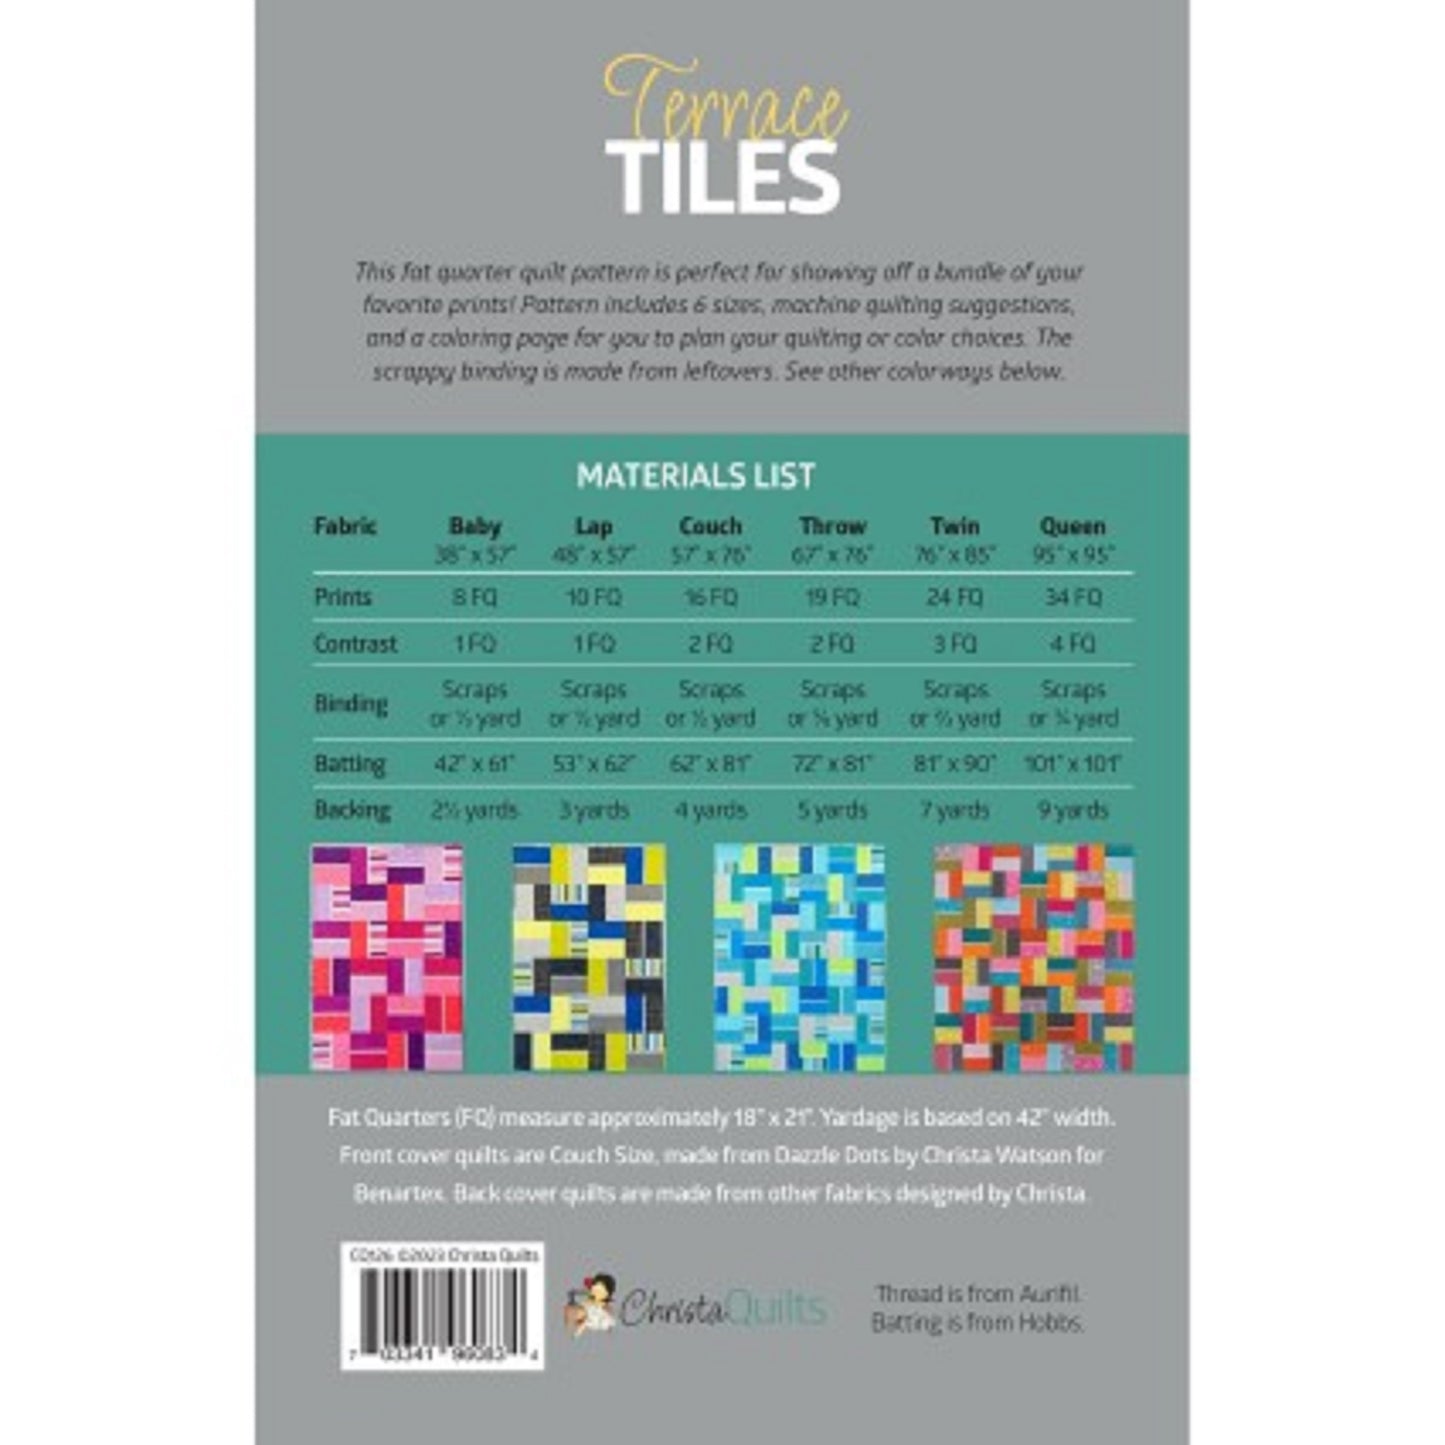 Terrace Tiles Quilt Pattern by Christa Quilts-6 sizes Included